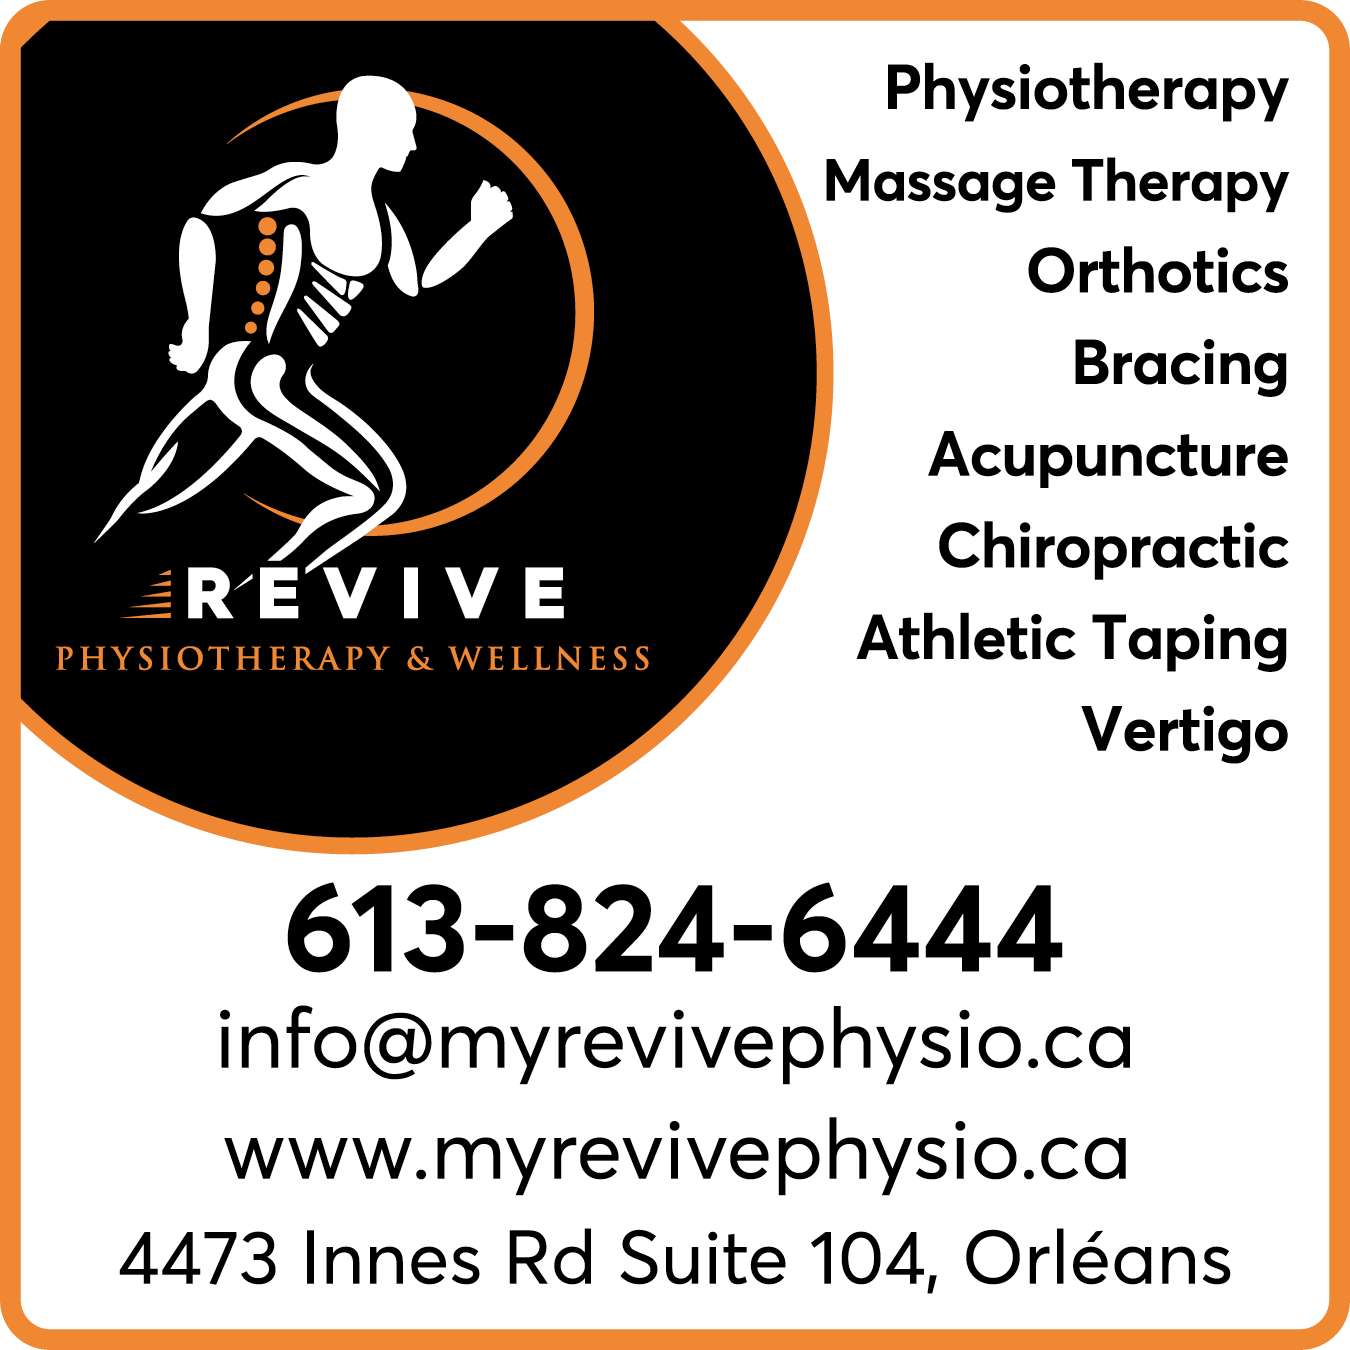 Revive Physiotherapy & Wellness